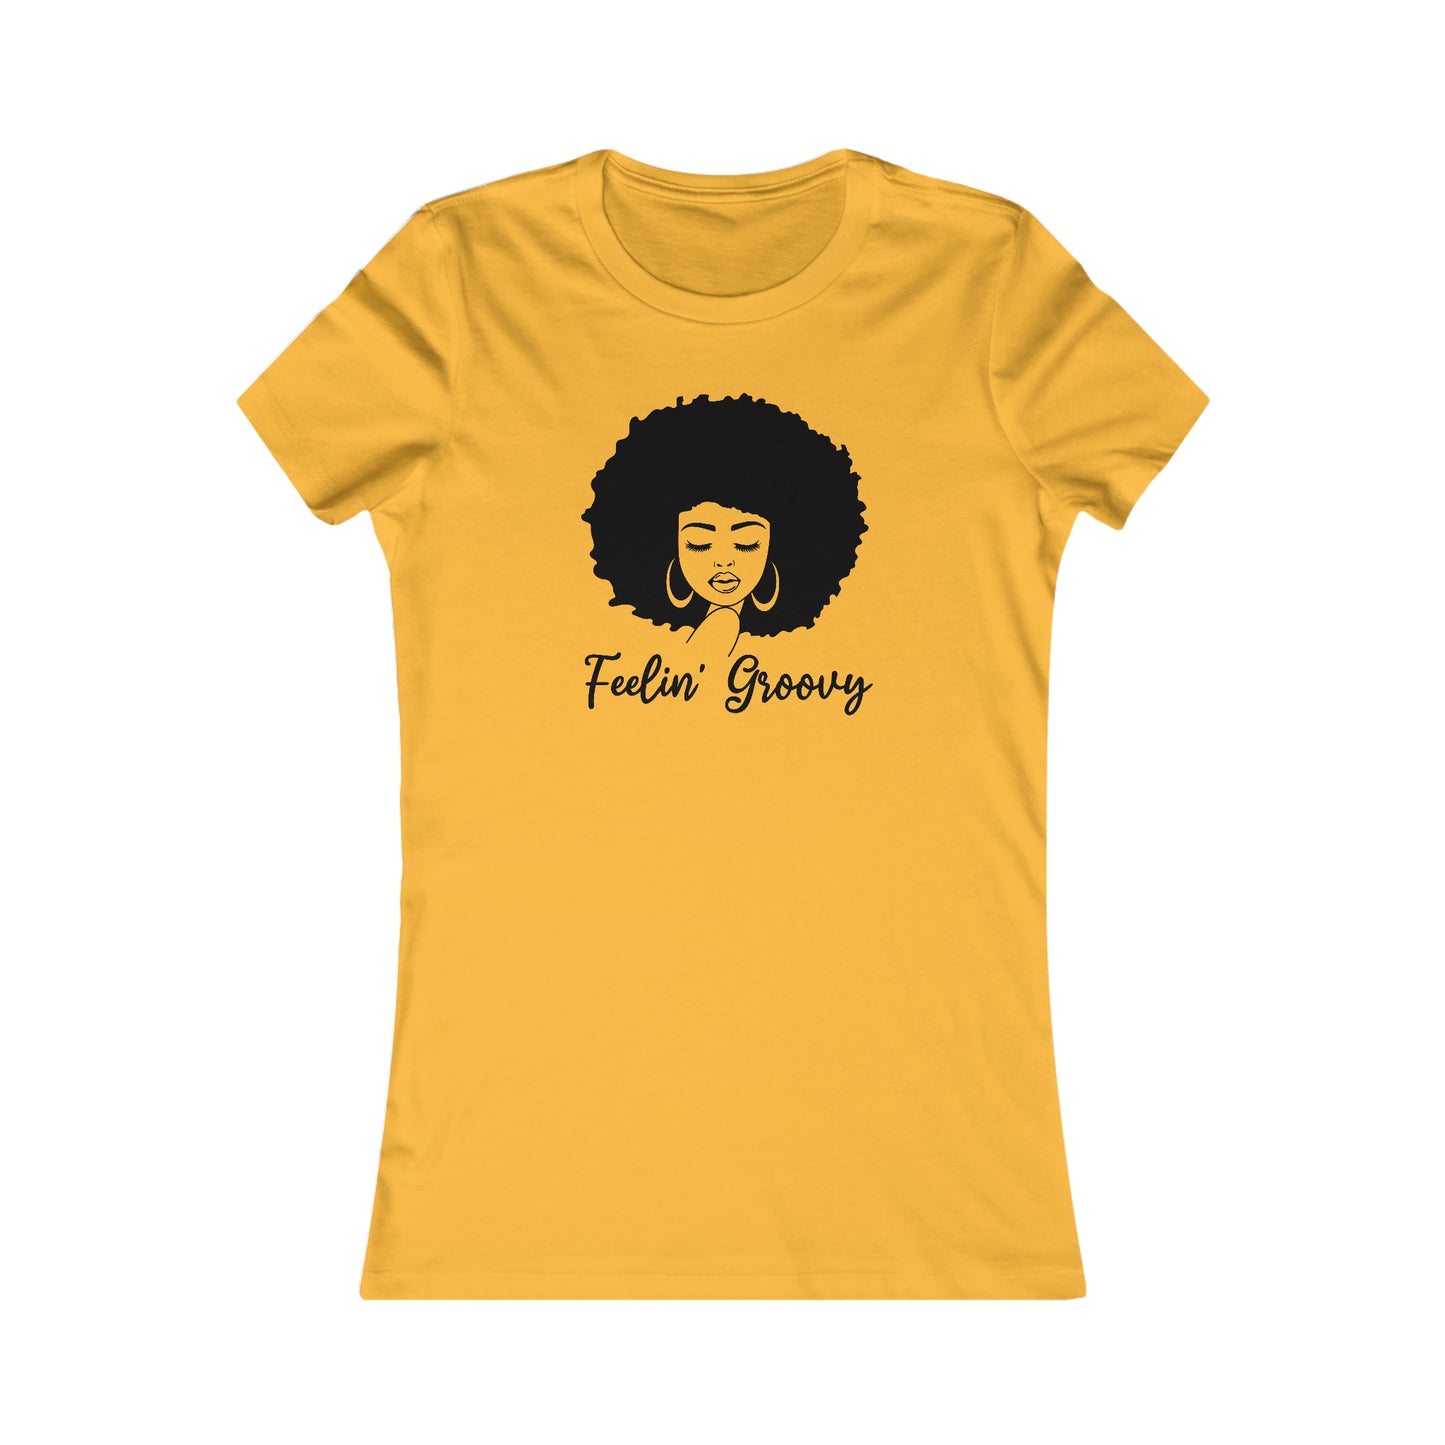 Groovy T-Shirt With Afro TShirt For Disco T Shirt For Seventies T-Shirt For Retro TShirt Groovy Retro Gift